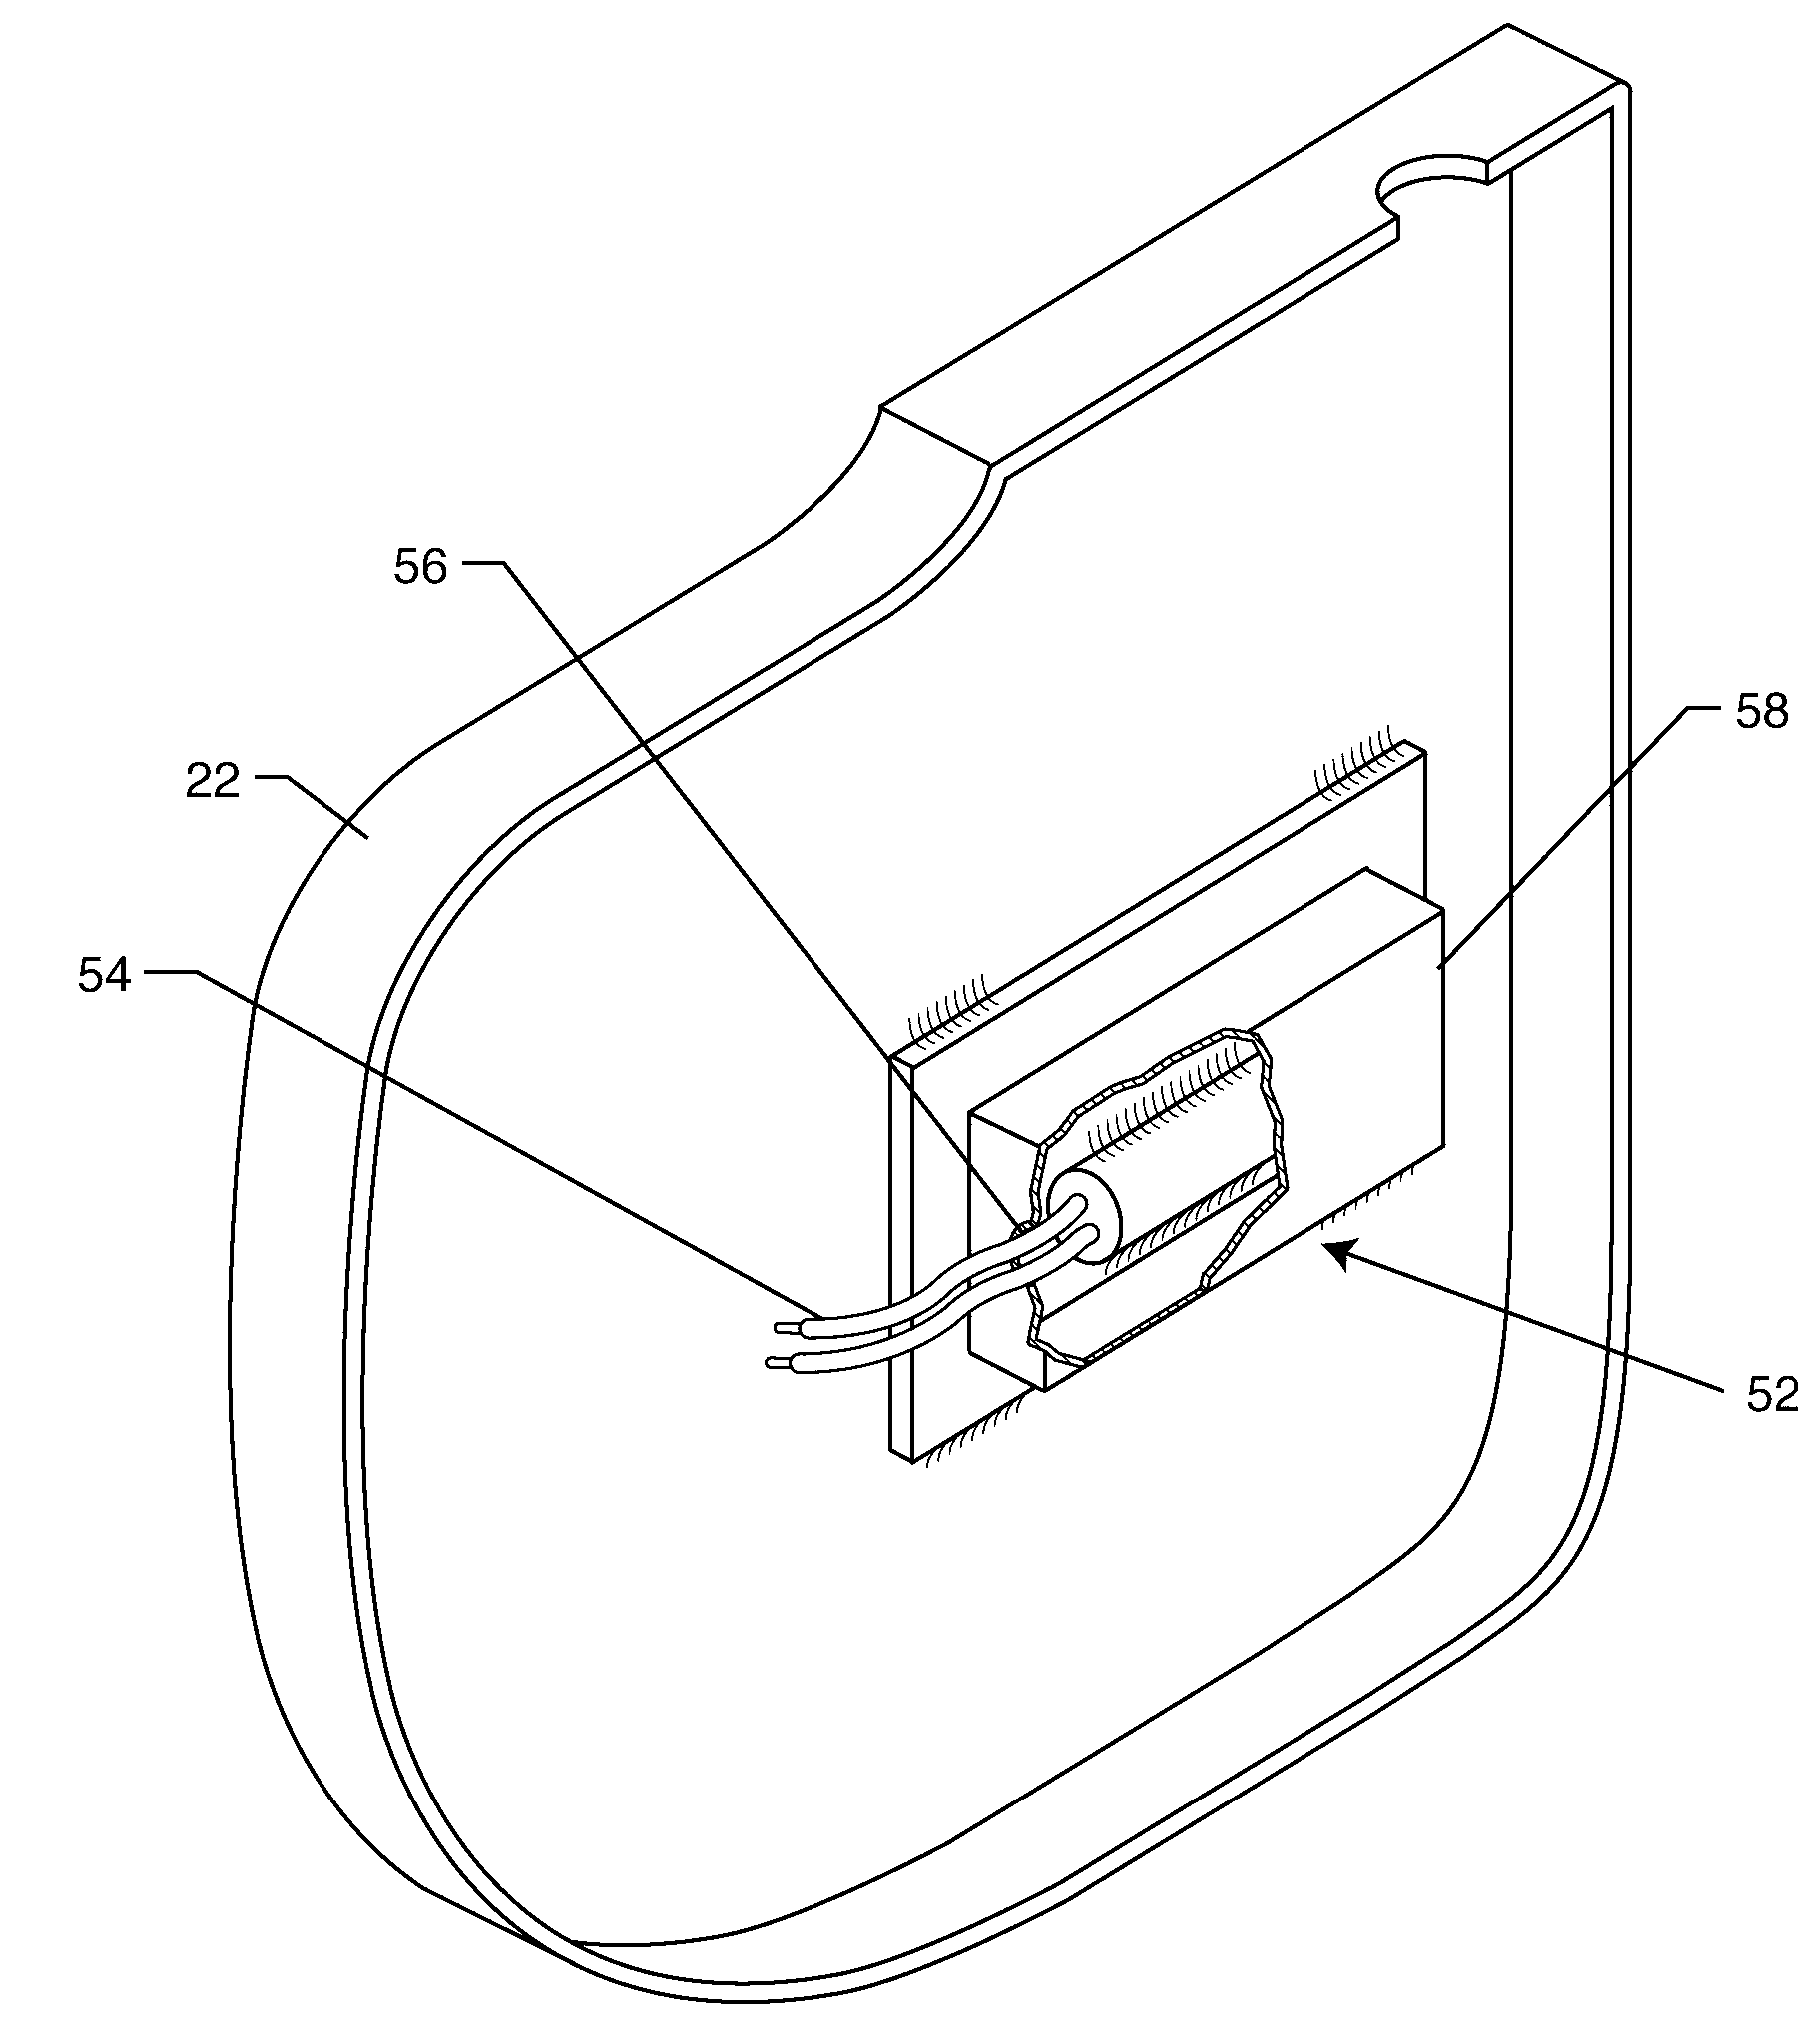 Magnetically shielded AIMD housing with window for magnetically actuated switch